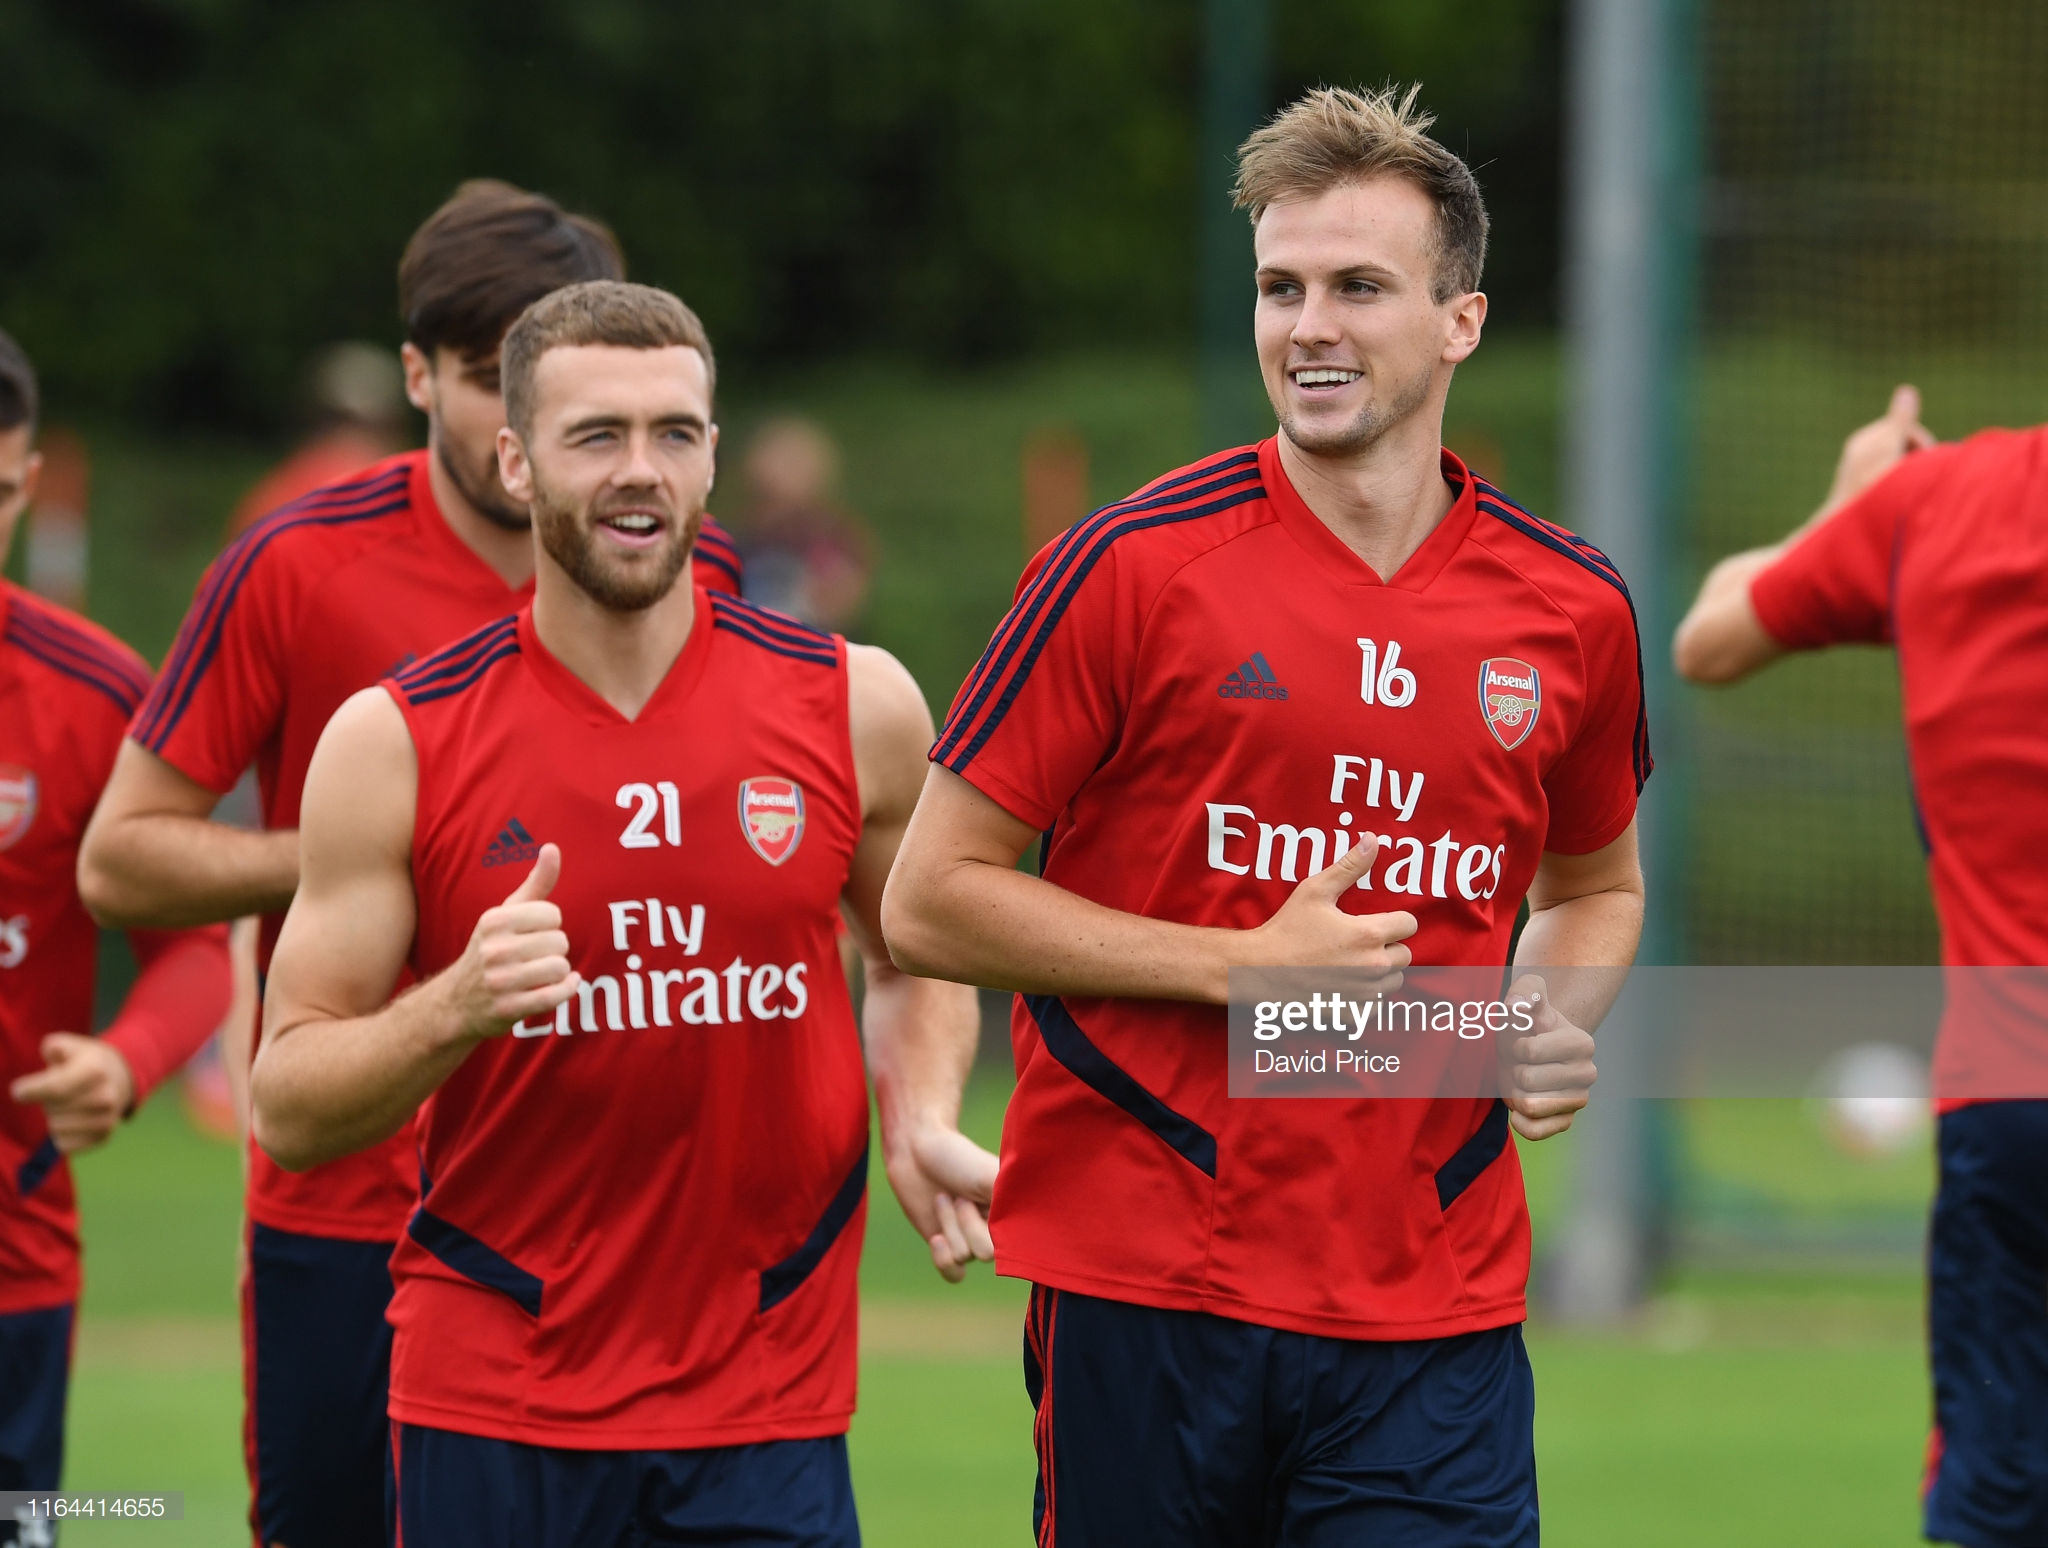 ST ALBANS, ENGLAND - JULY 26: Rob Holding of Arsenal during the Arsenal Training Session at London Colney on July 26, 2019, in St Albans, England. (Photo by David Price/Arsenal FC via Getty Images)